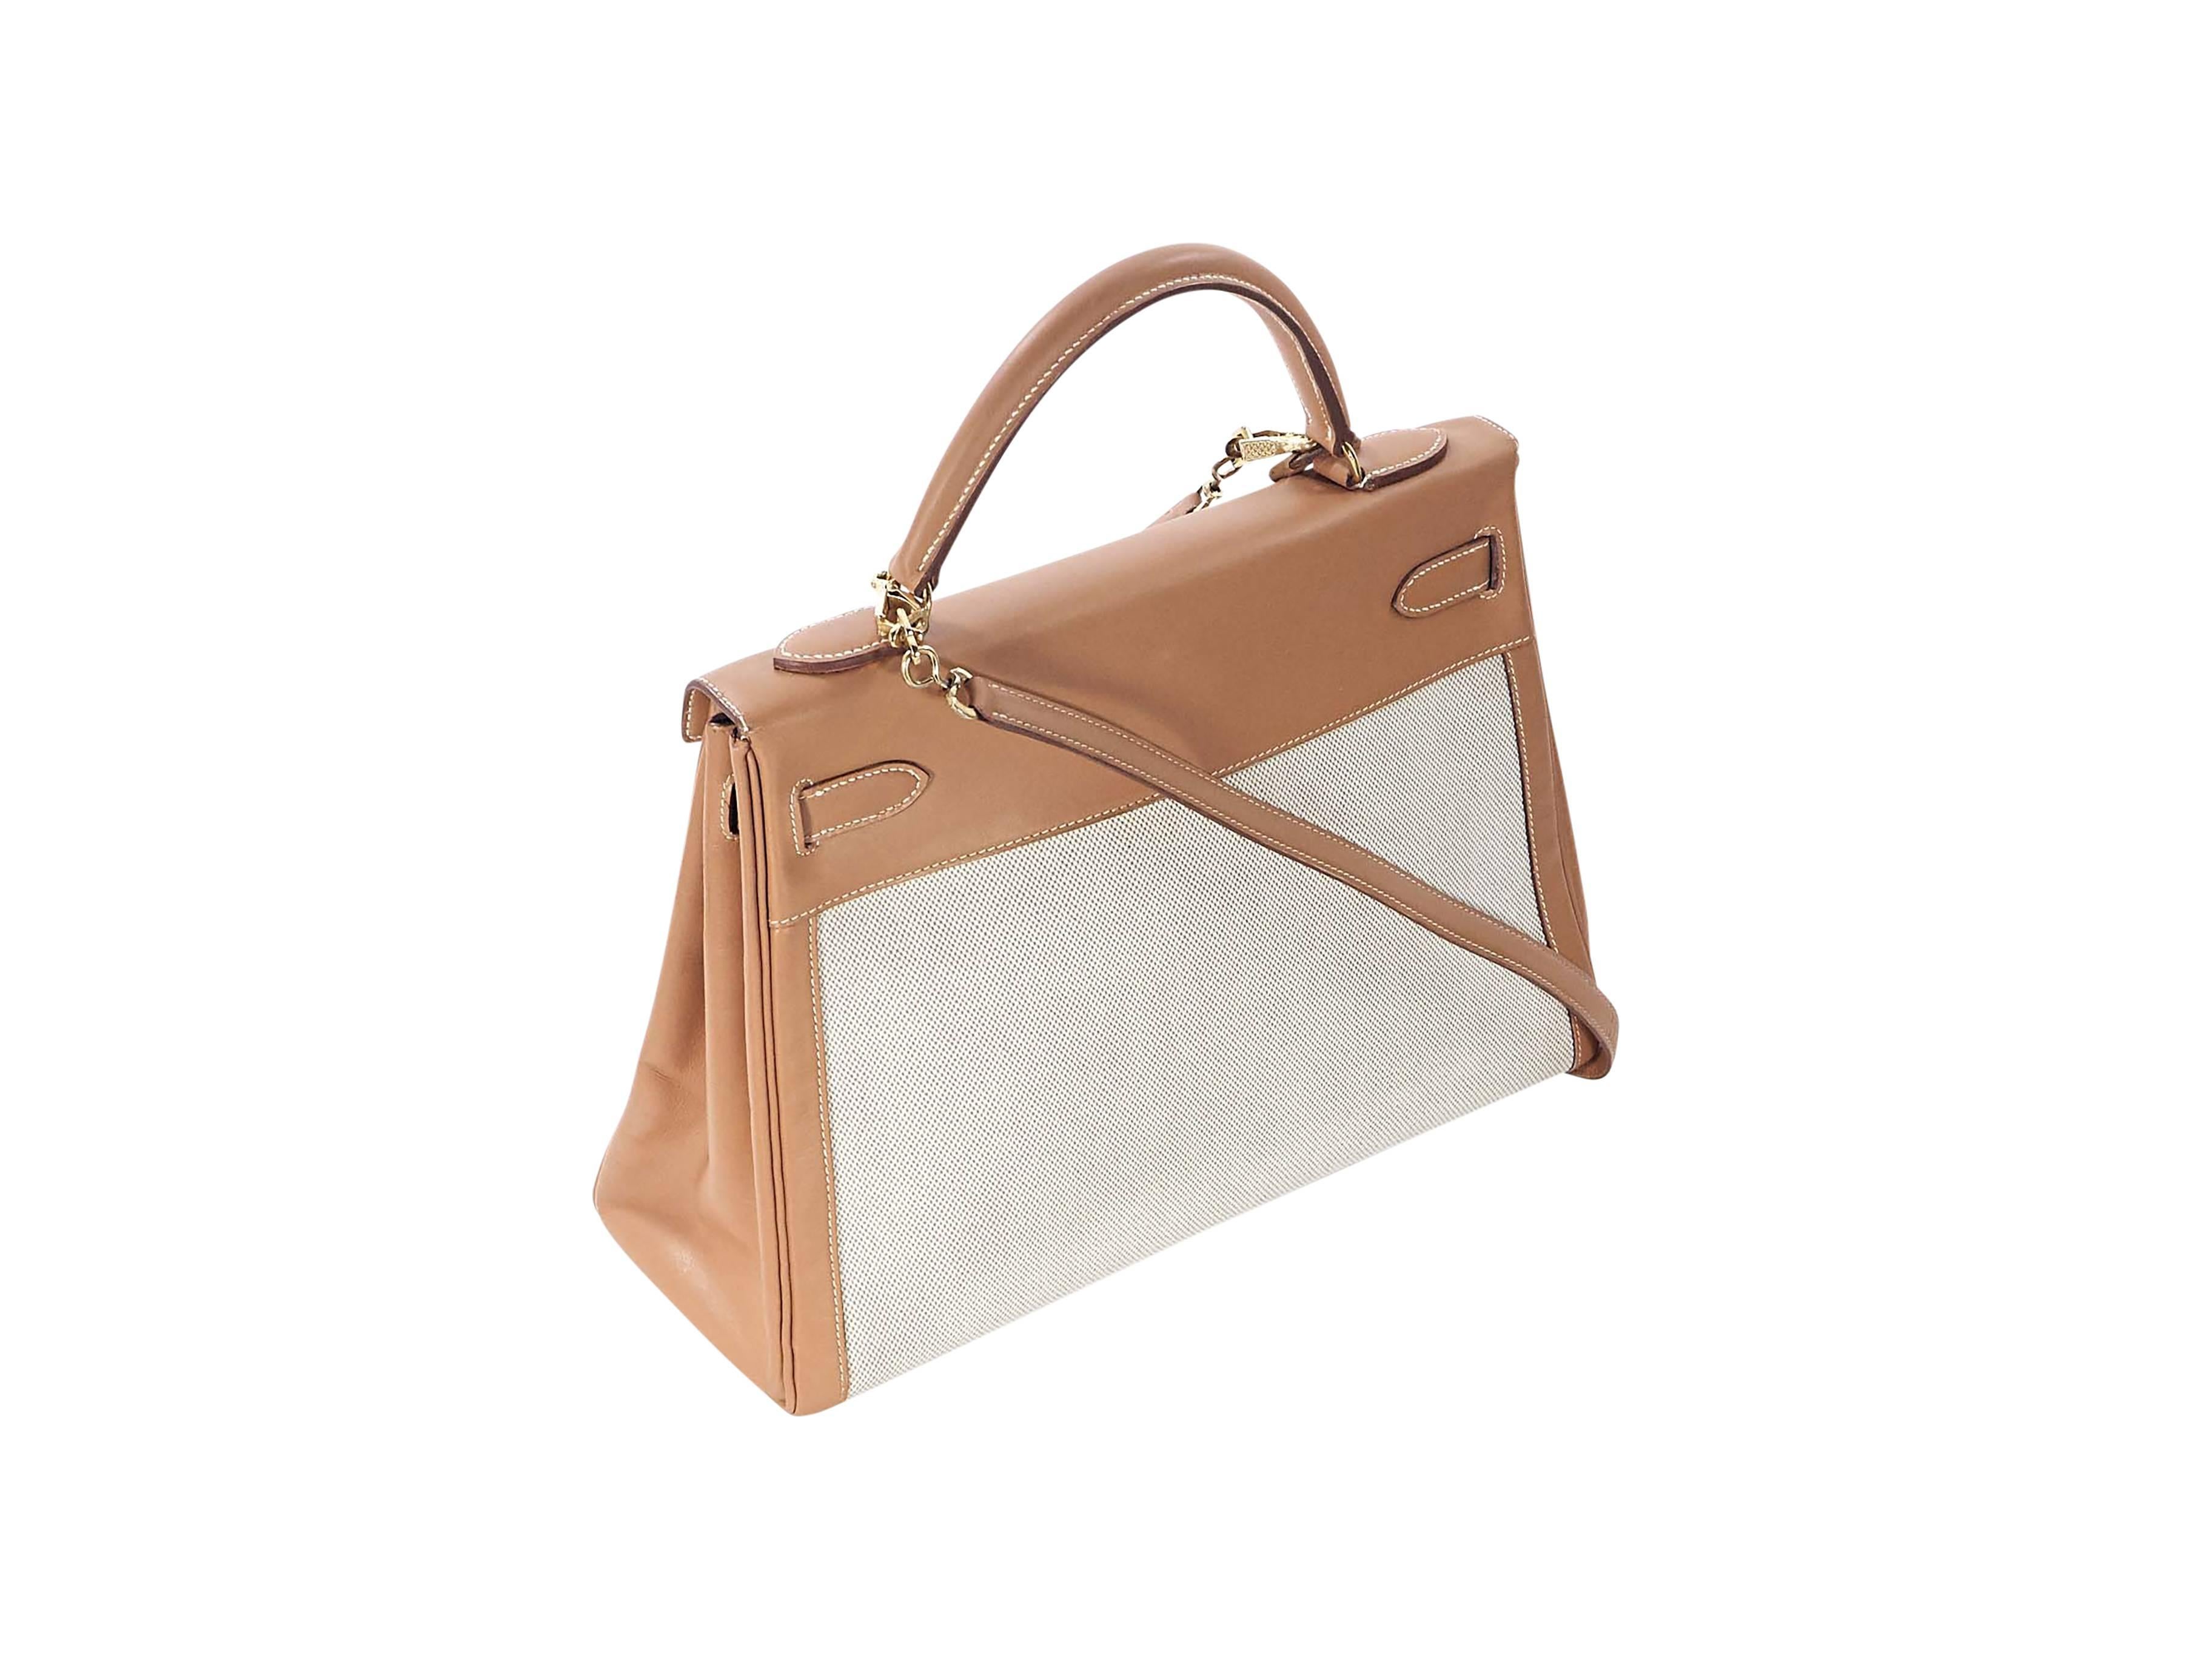 Product details: Tan leather and canvas Kelly bag by Hermès. Top carry handle. Detachable shoulder strap. Lock and key strap closure. Leather lined interior with inner zip and slide pockets. Protective metal feet. Goldtone hardware. 
Condition: Very